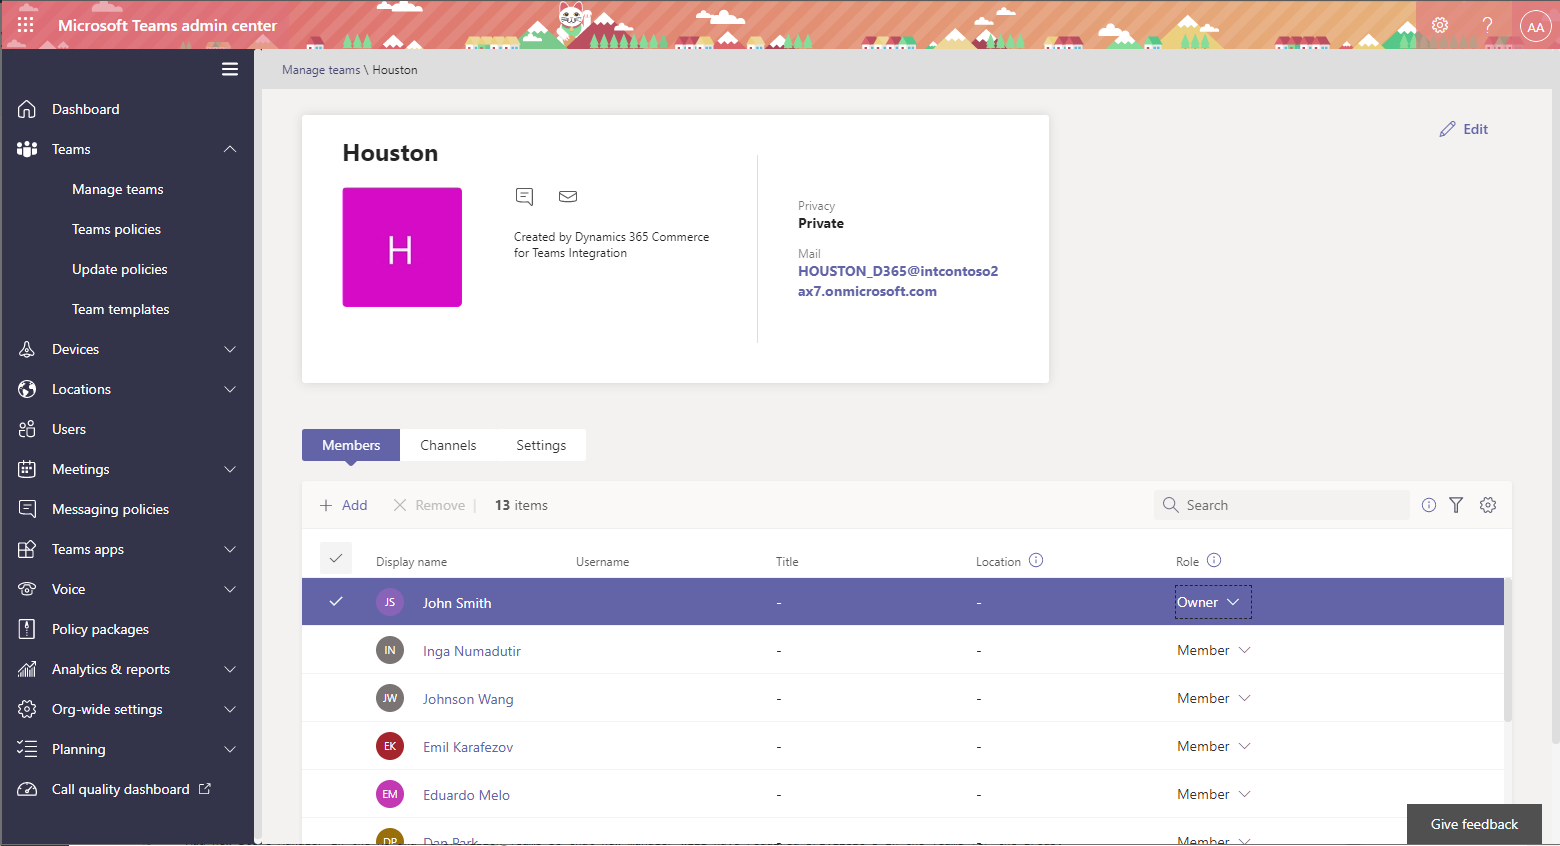 Team members and user roles in the Microsoft Teams admin center.